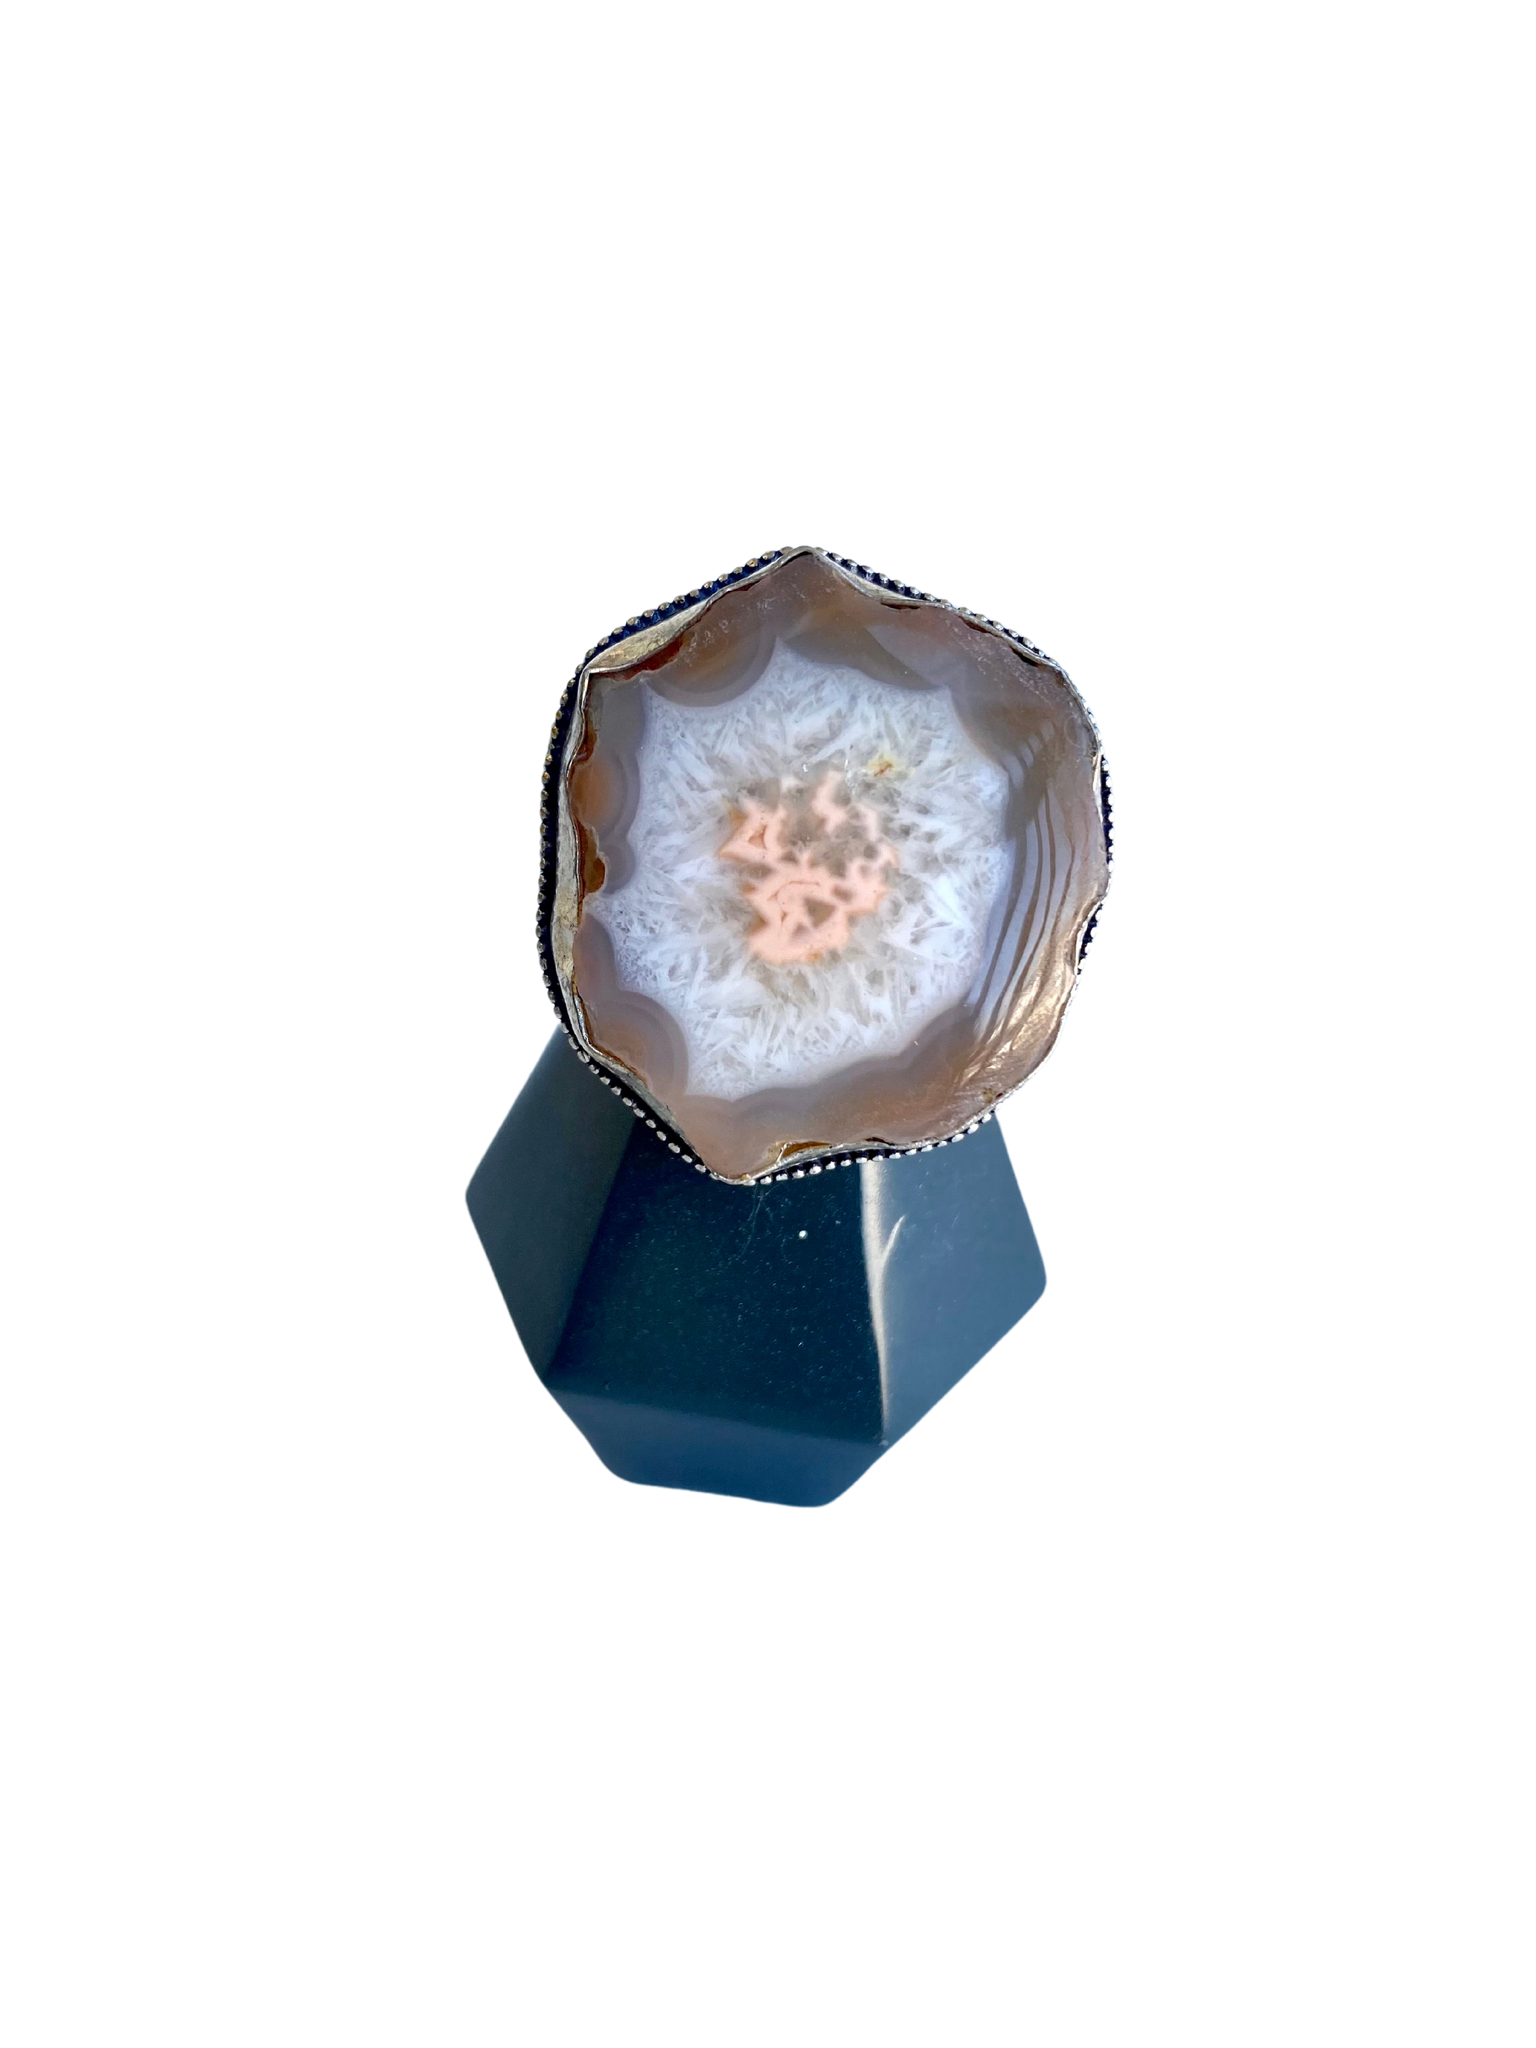 Tan/White Agate Geode Druzy Gemstone 925 Silver Plated Antique Ring - Size 9.5